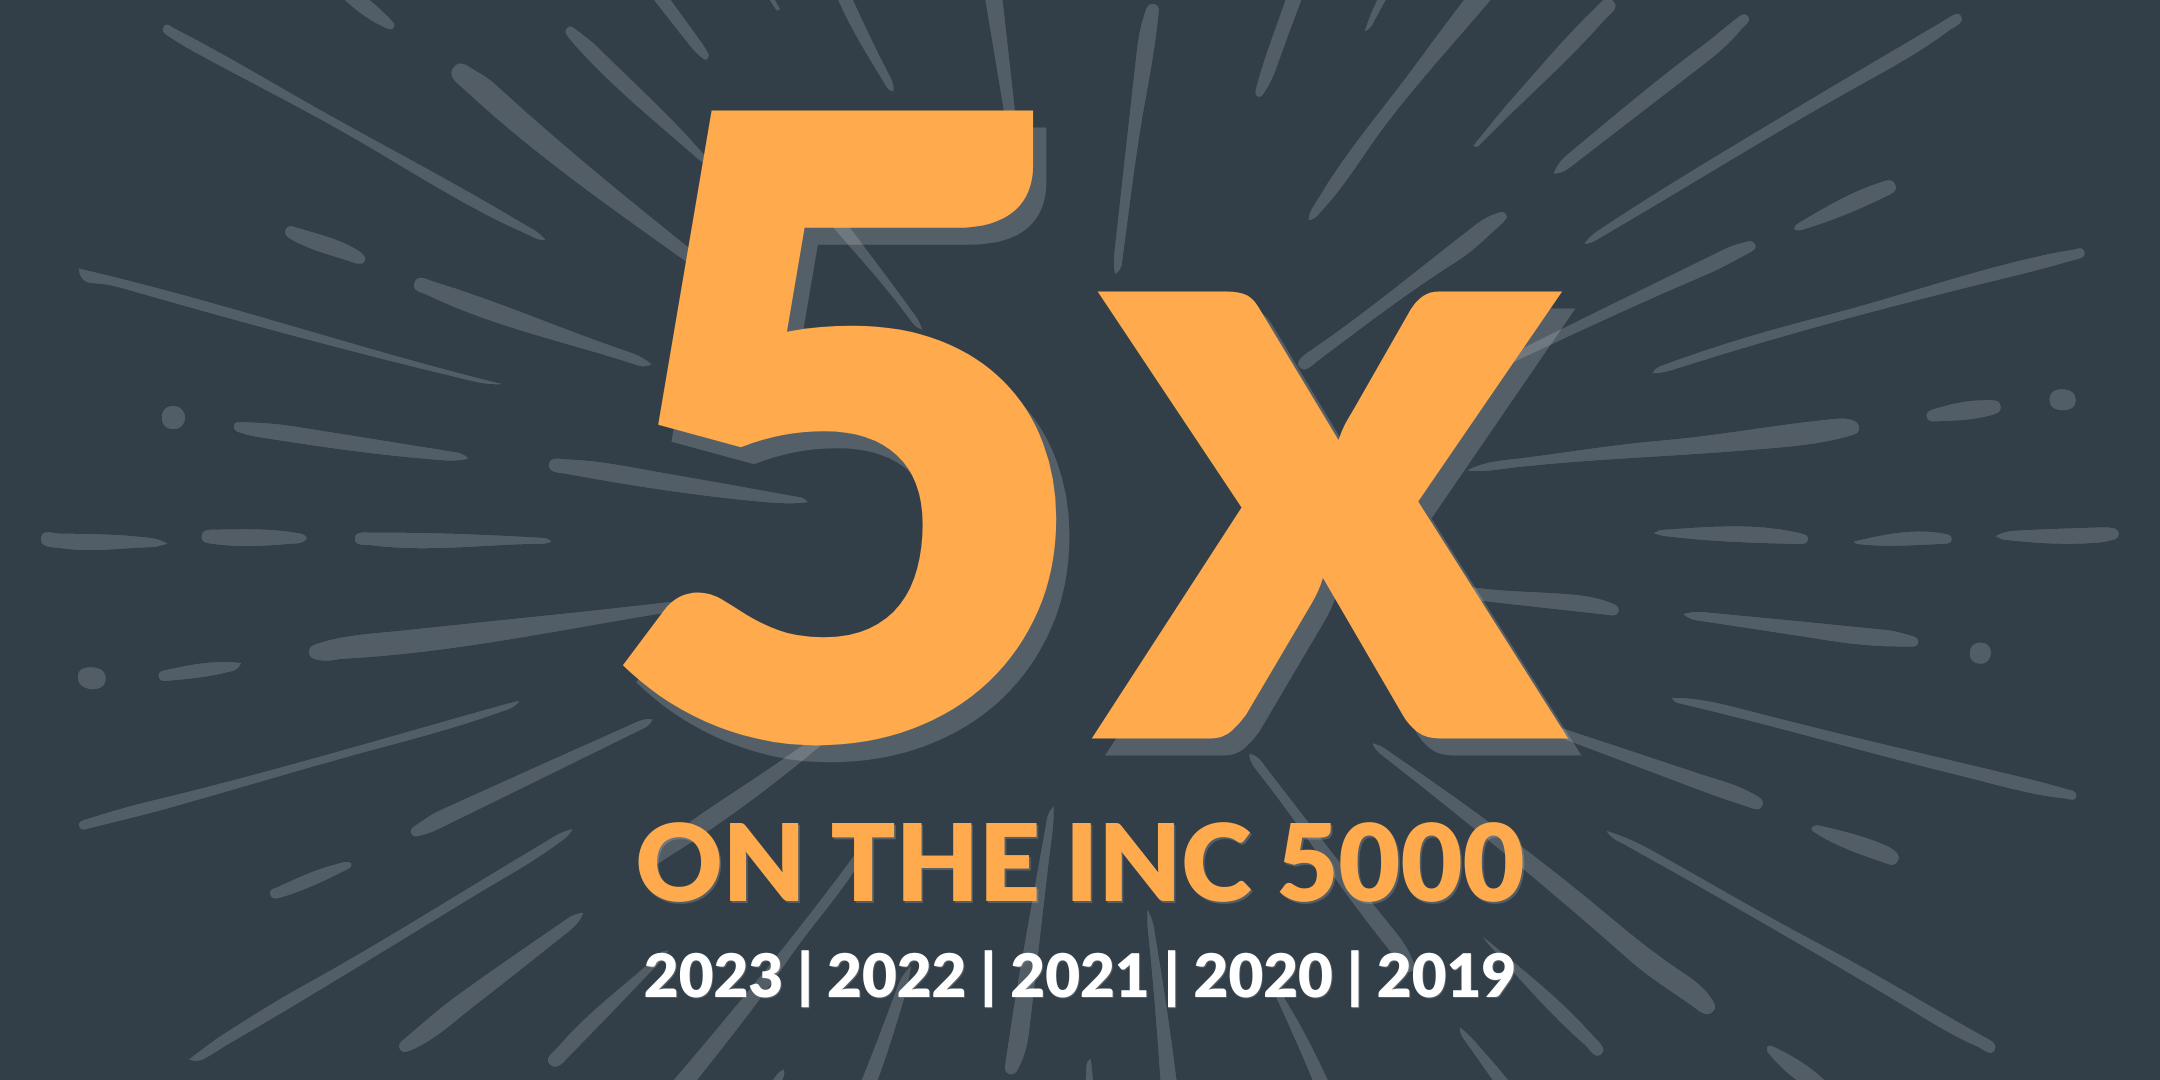 Fund That Flip has been named to the Inc. 5000 for the fifth time in a row, with 555% growth.